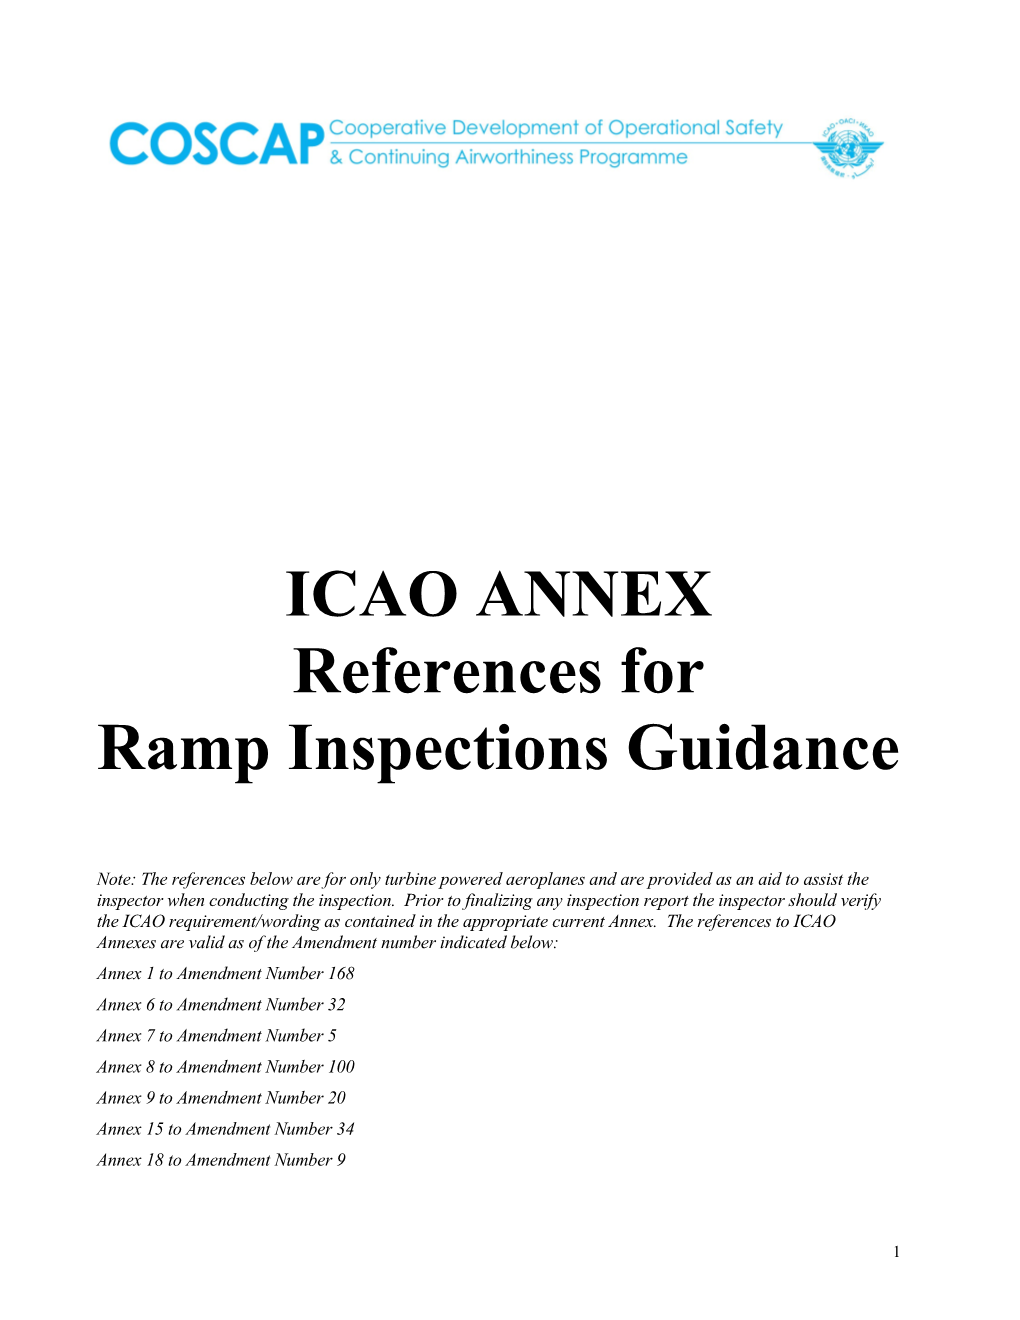 Reference ANNEXES for ICAO Ramp Inspections Guidance